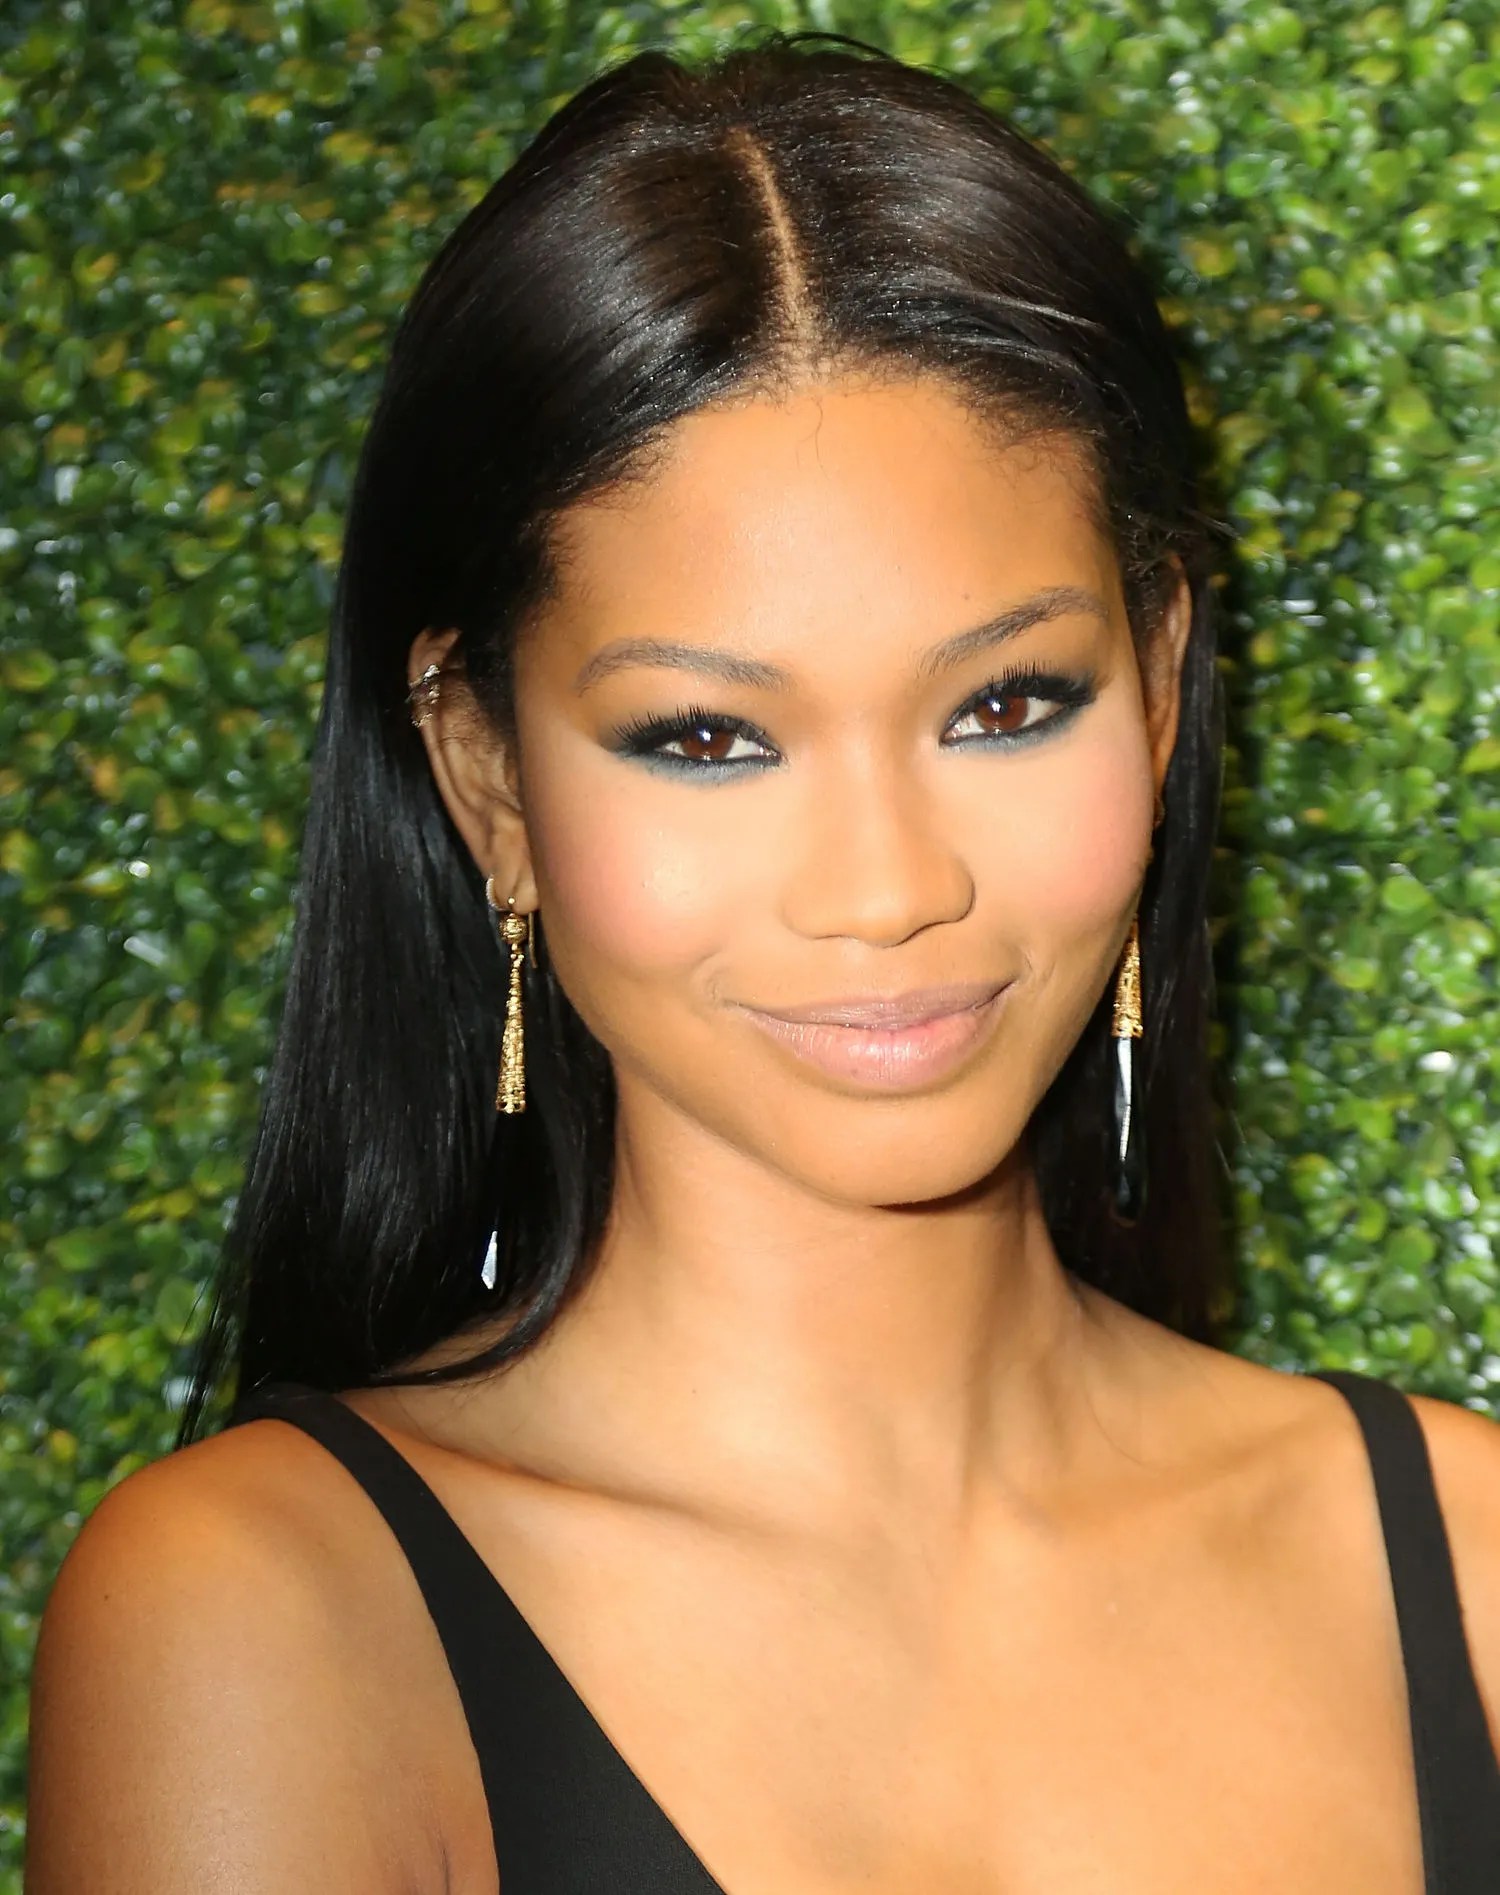 Chanel Iman Confesses "She's Been My Girl Crush Since I Was 2 Years